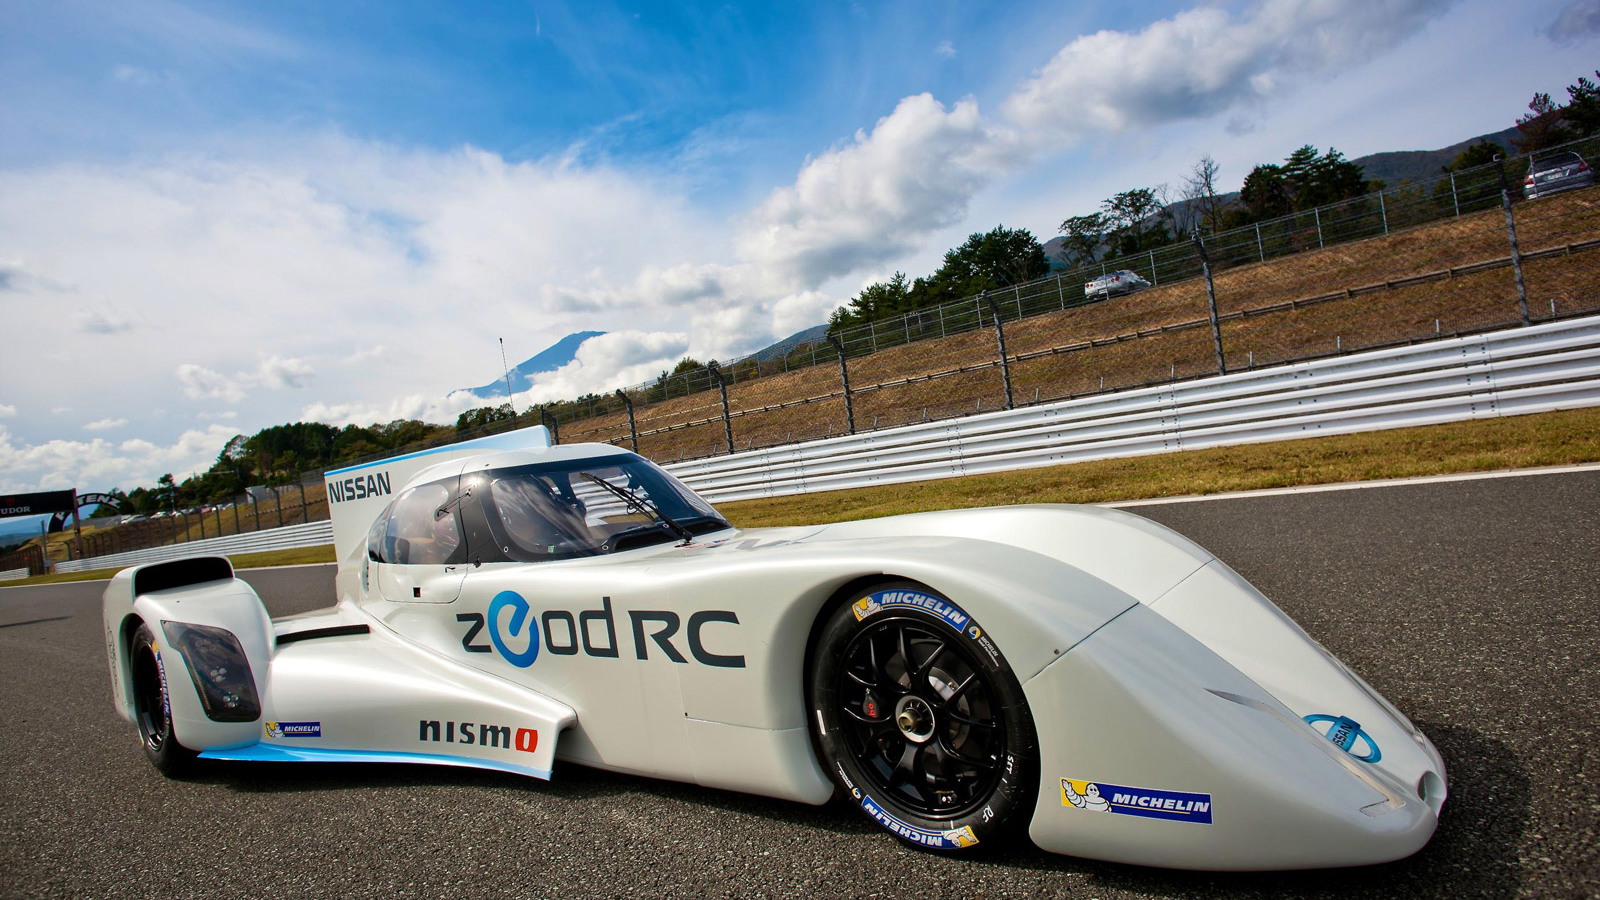 2014 Nissan ZEOD RC Le Mans prototype makes track debut at Fuji Speedway